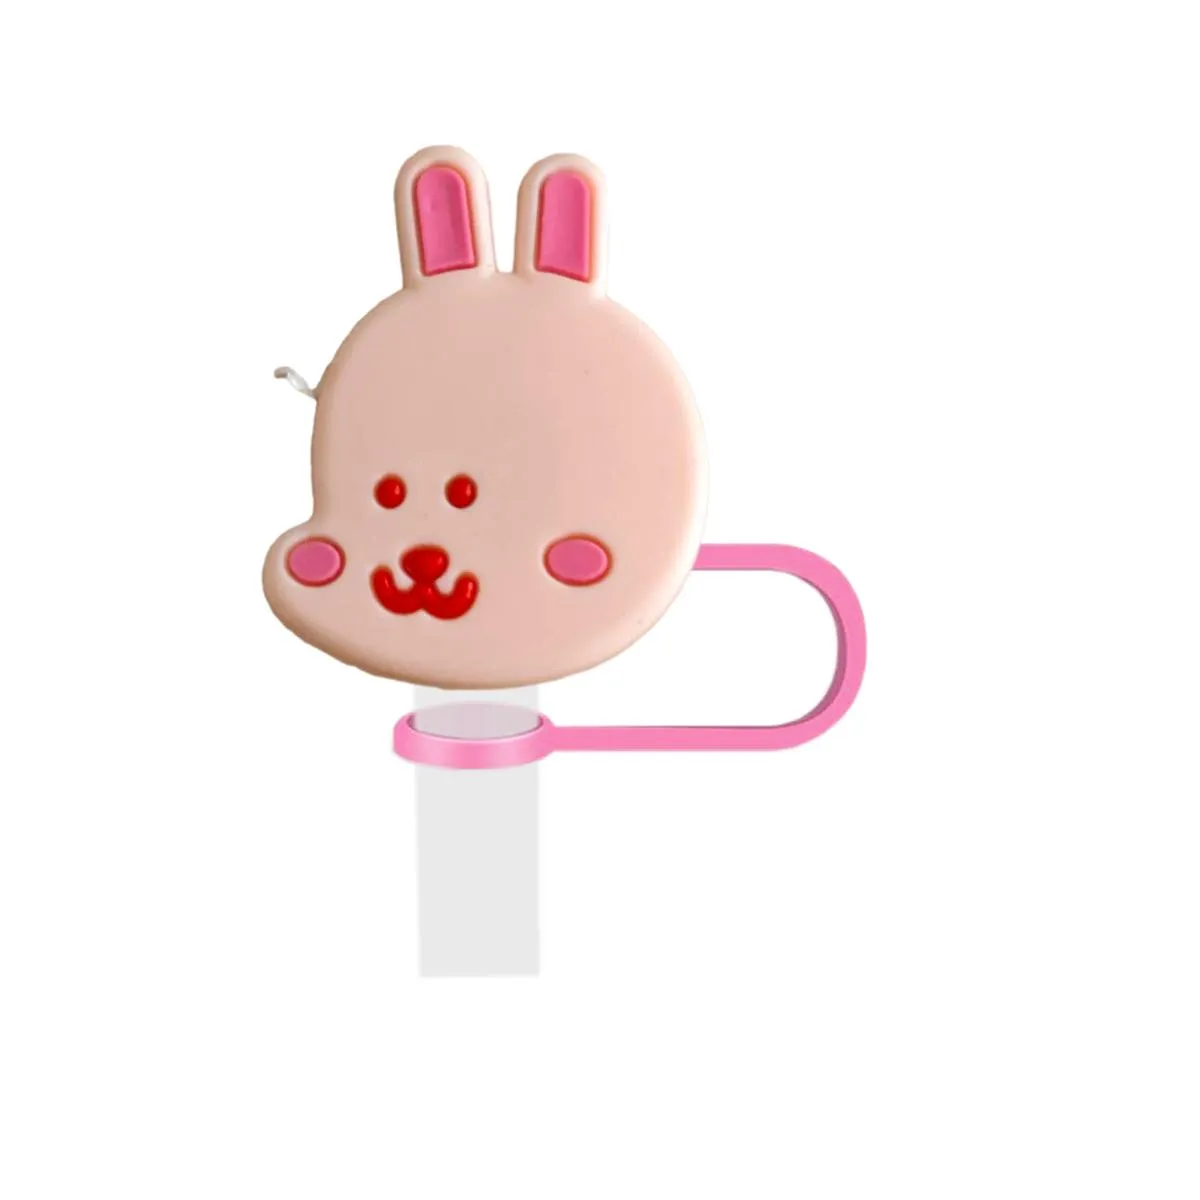 rabbit straw cover for  cups 10mm cap cup 30 oz 40 reusable dust-proof topper compatible with simple modern and tumbler cute silicone tips lids protectors caps